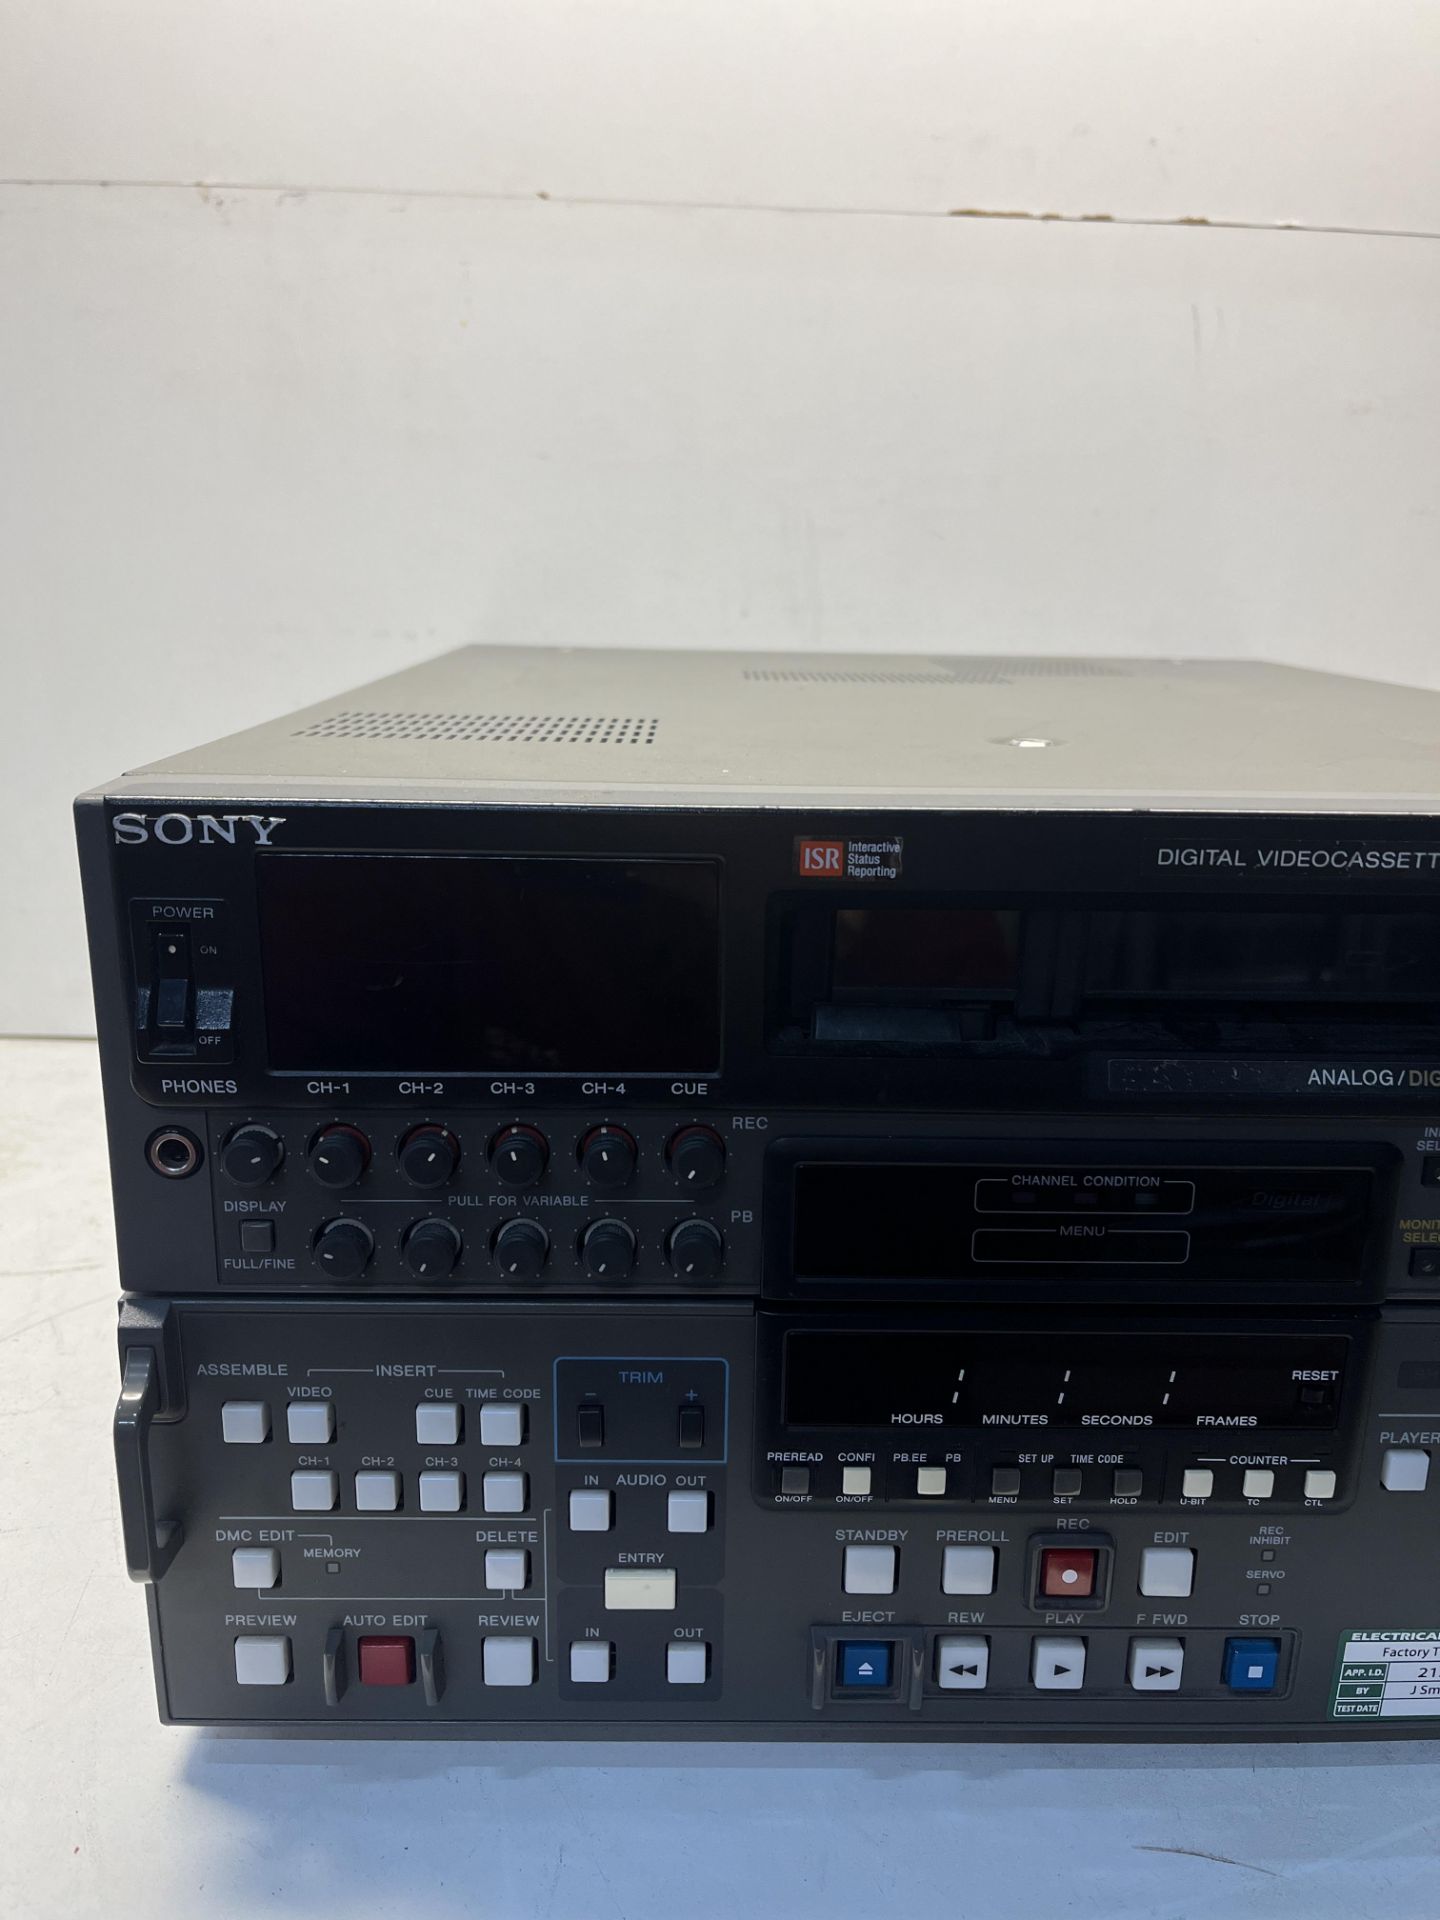 Sony Digital Videocassette Recorder DVW-A500P - Image 3 of 7